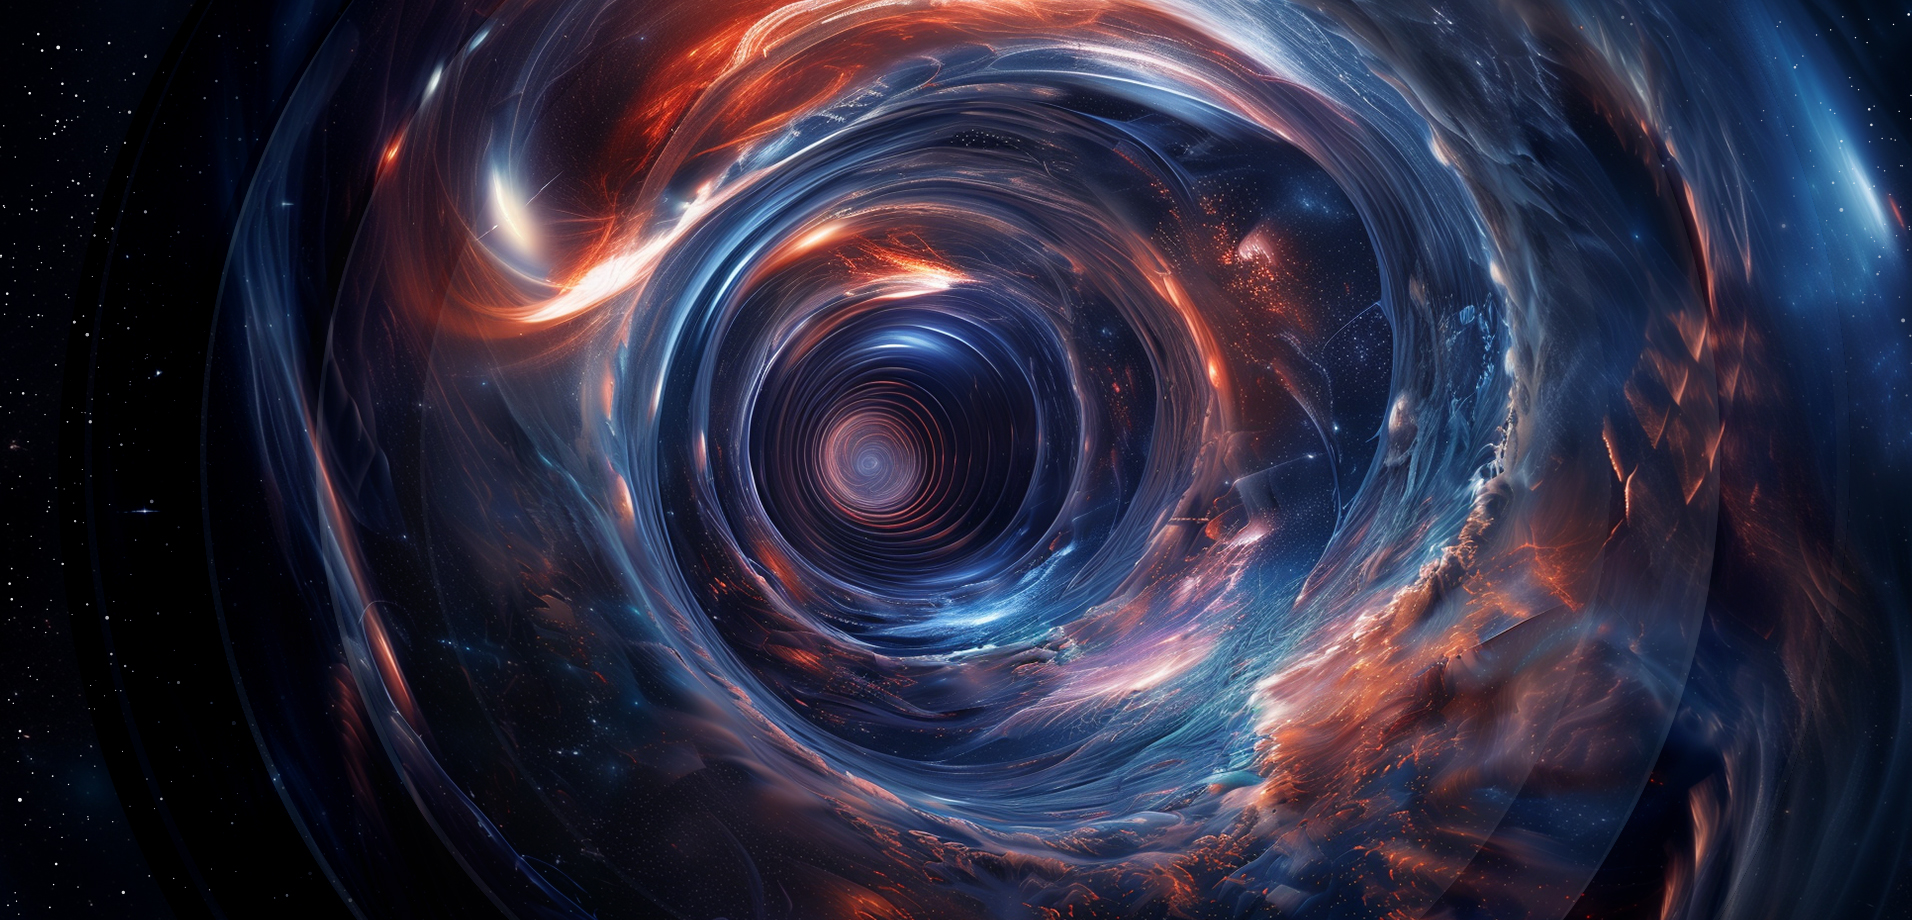 Are Wormholes Real? And Could We Ever Build One? - Orbital Today